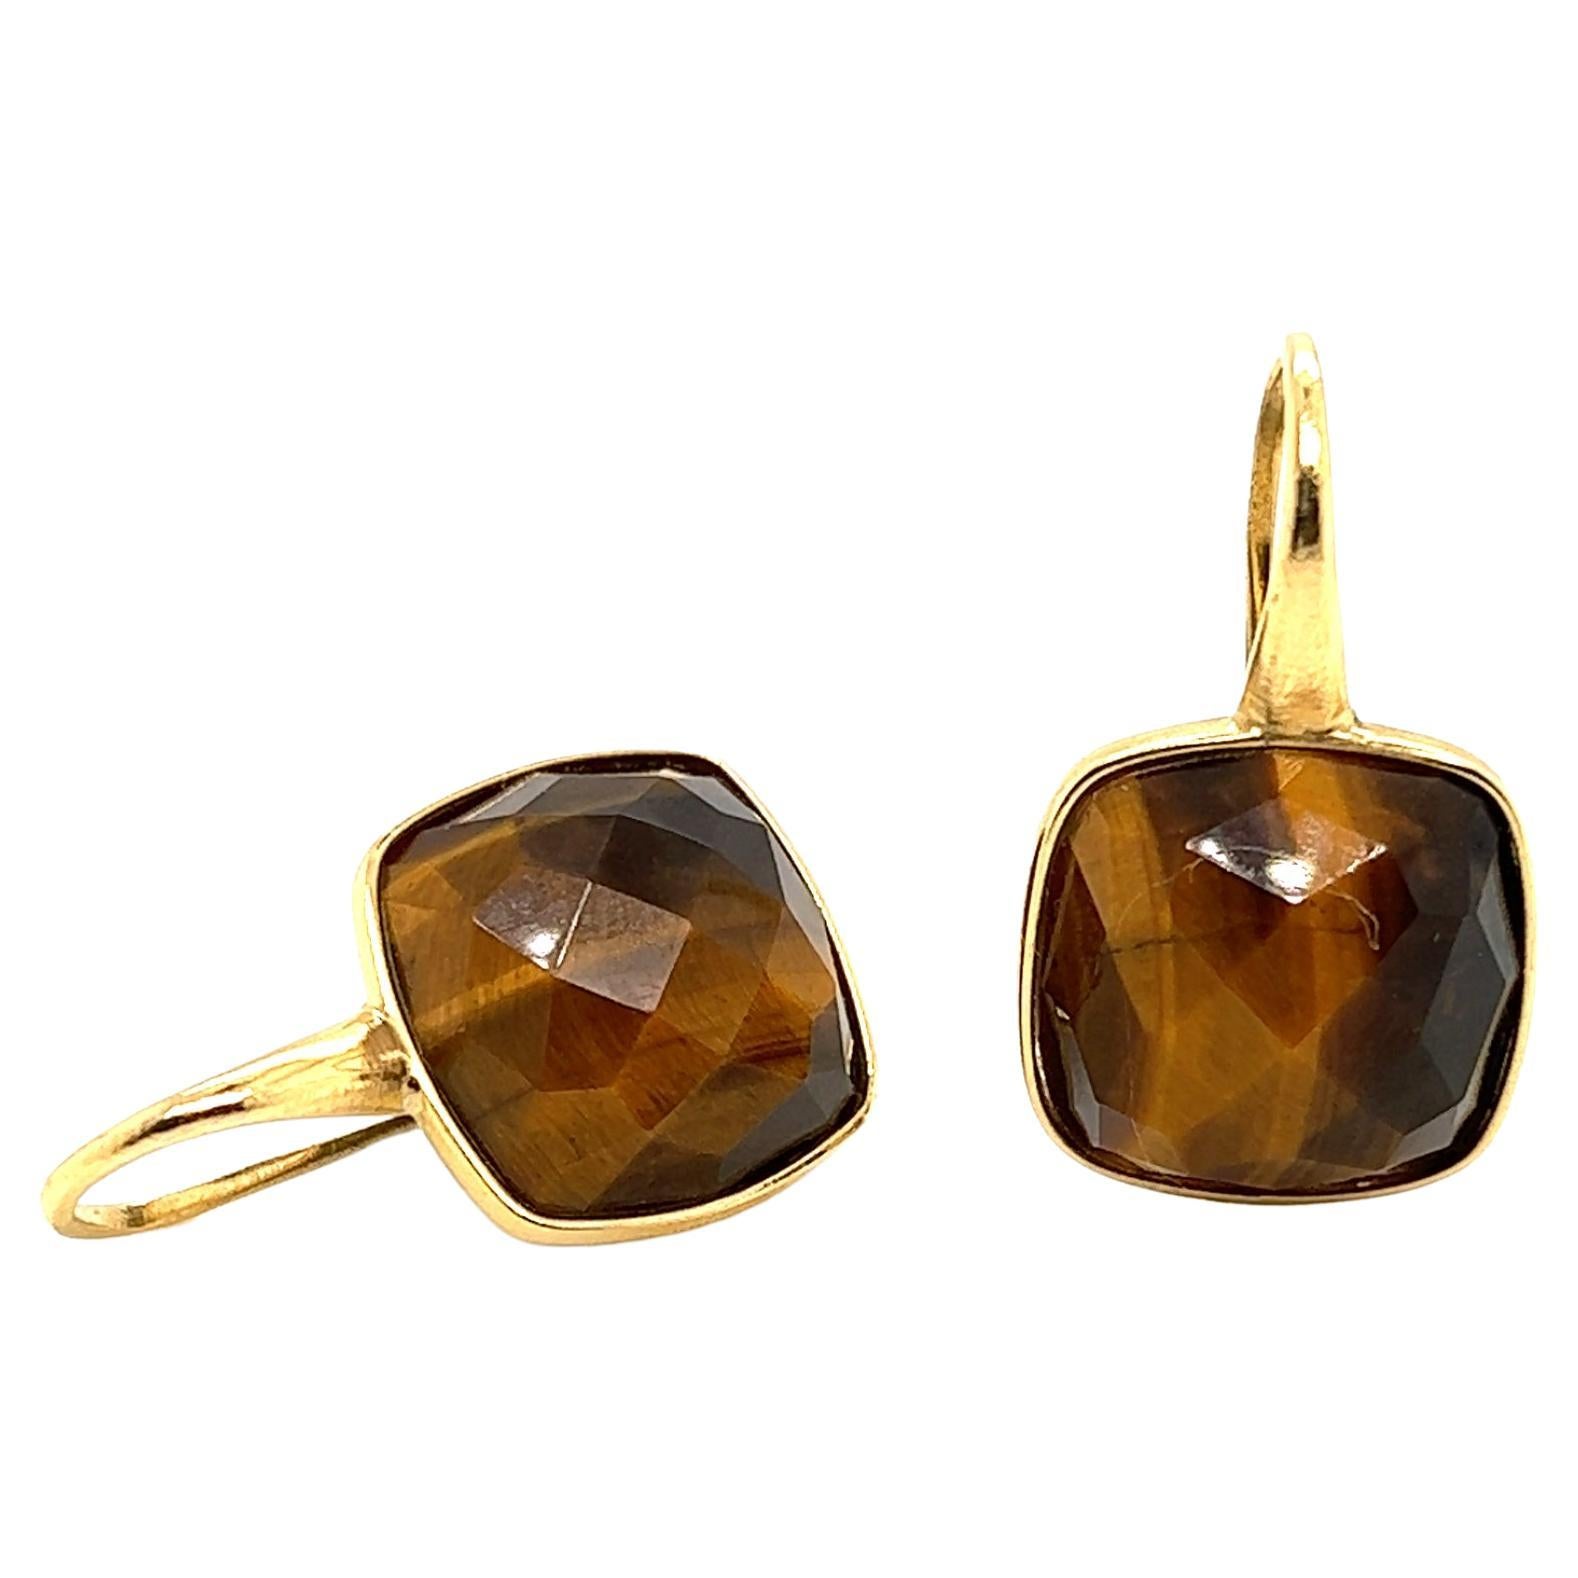 Discover this elegant yellow gold chandelier earring from the French collection of Mesure et Art du Temps. This piece is accompanied by a superb tiger's eye stone, which adds a touch of natural charm to the ensemble.

Measuring 1.5 cm long and 0.7